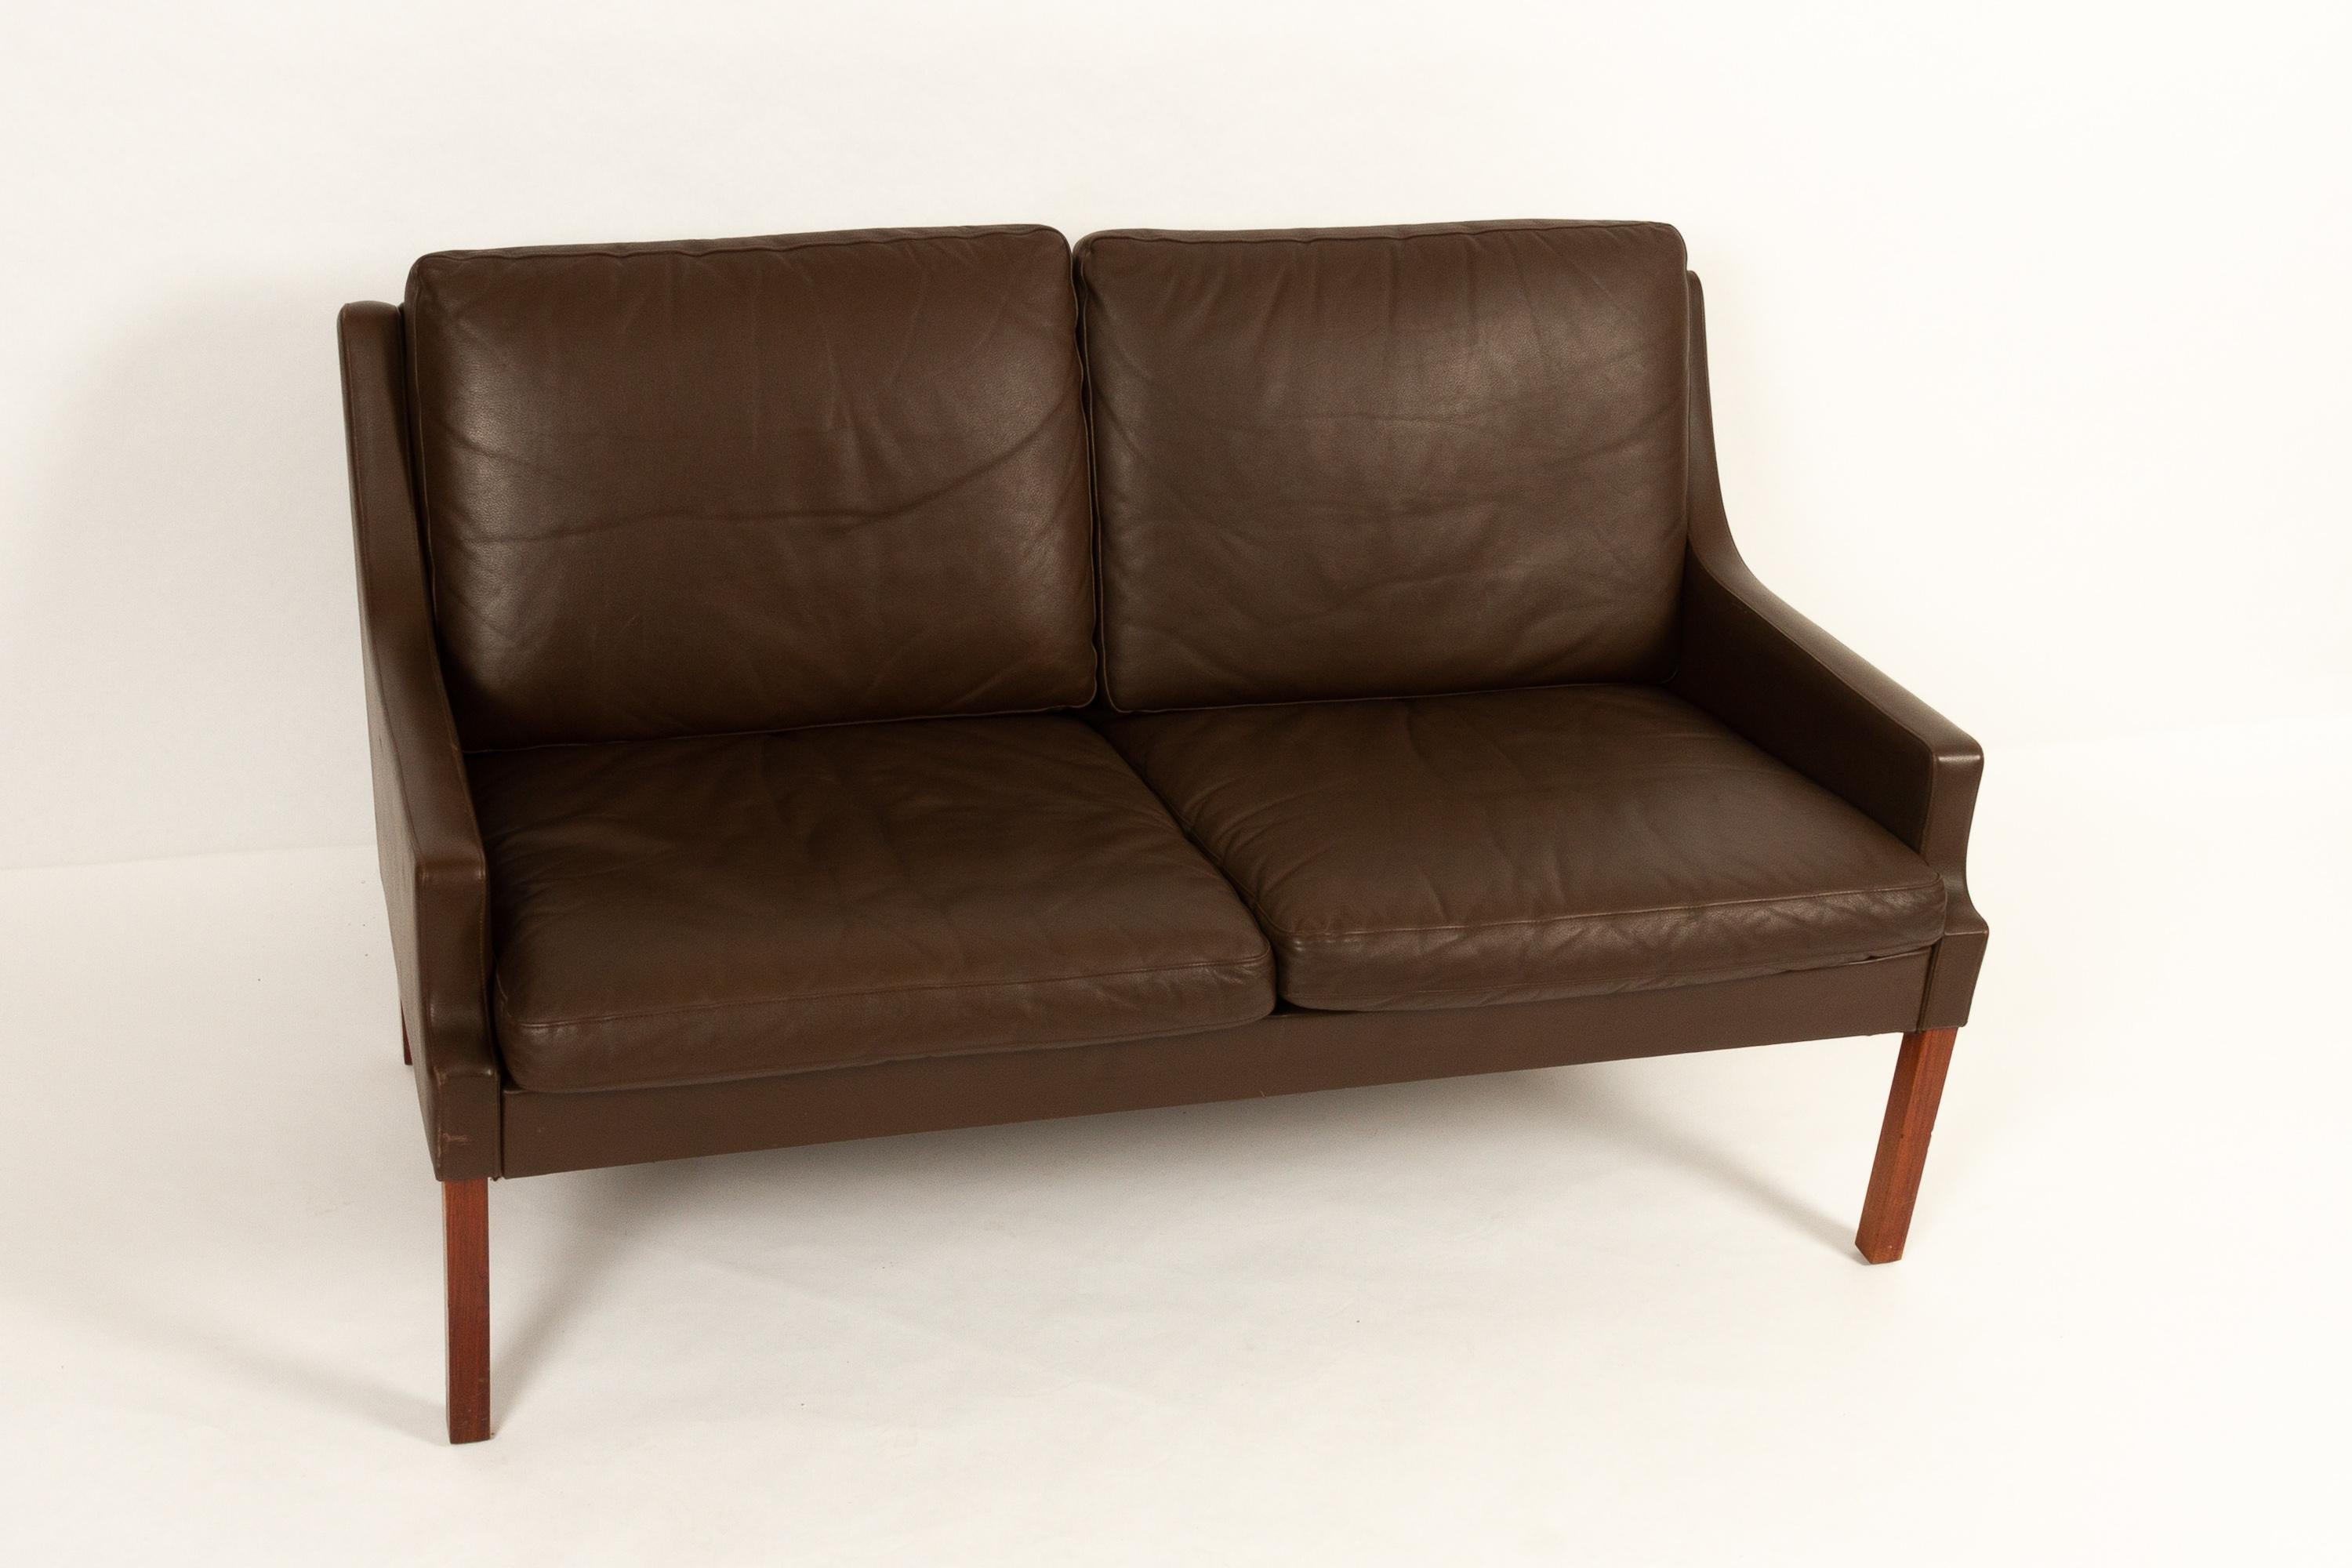 Vintage Danish two-seat leather sofa by Georg Thams for Vejen Møbelfabrik 1970s.
Elegant Classic Mid-Century Modern two-seater sofa in dark chocolate colored leather, standing four square hardwood legs. Soft and very comfortable down filled